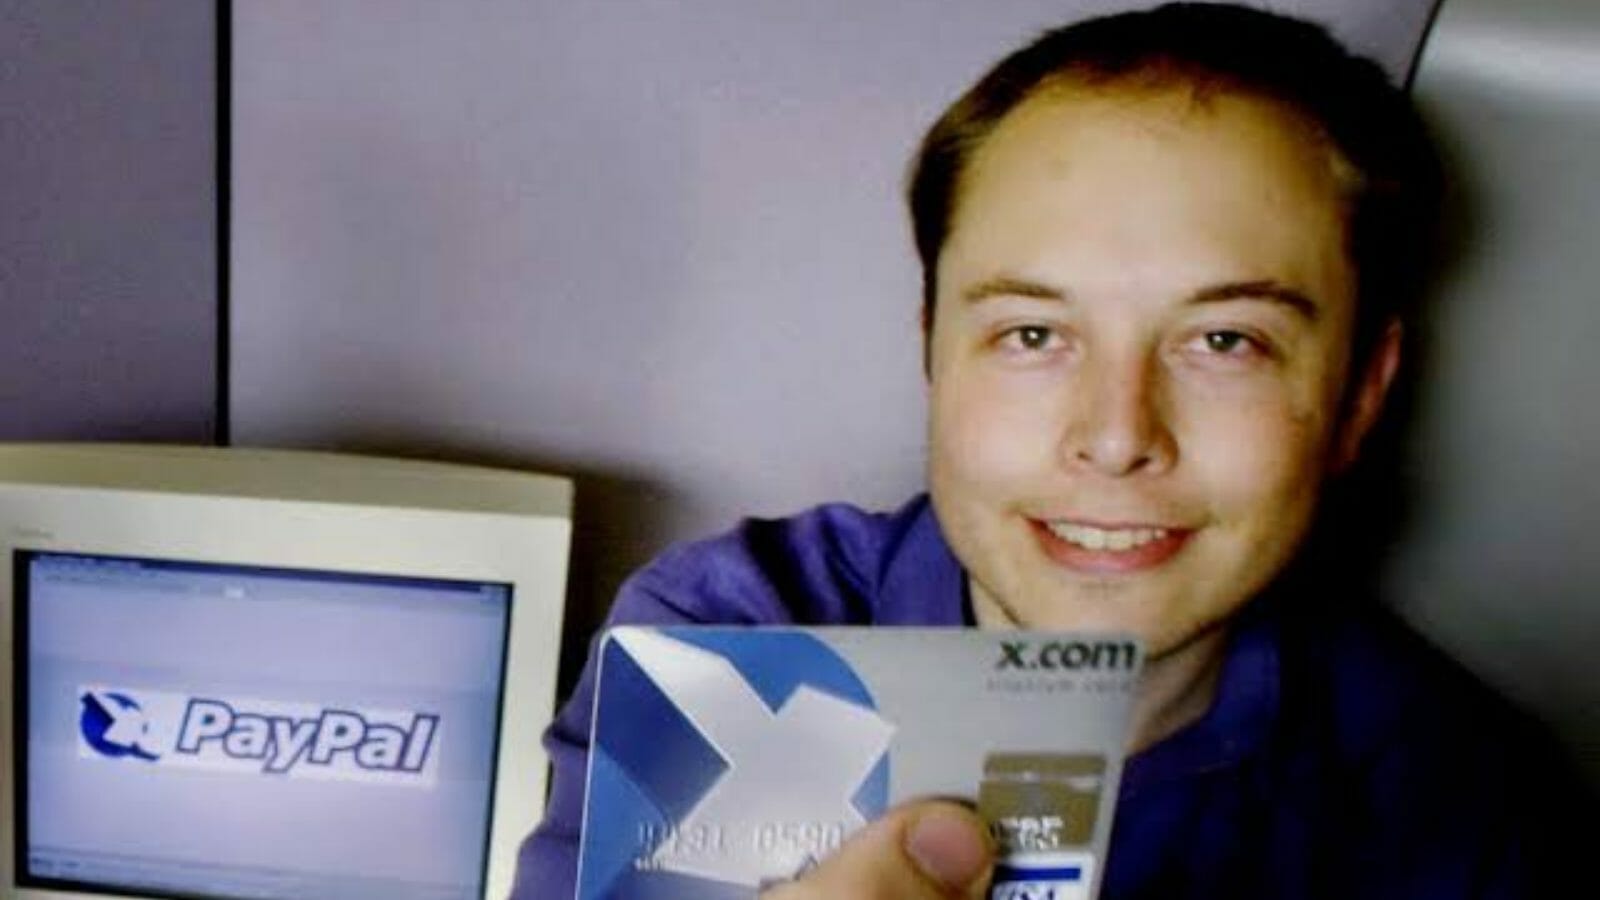 Elon Musk during his PayPal days before the fallout